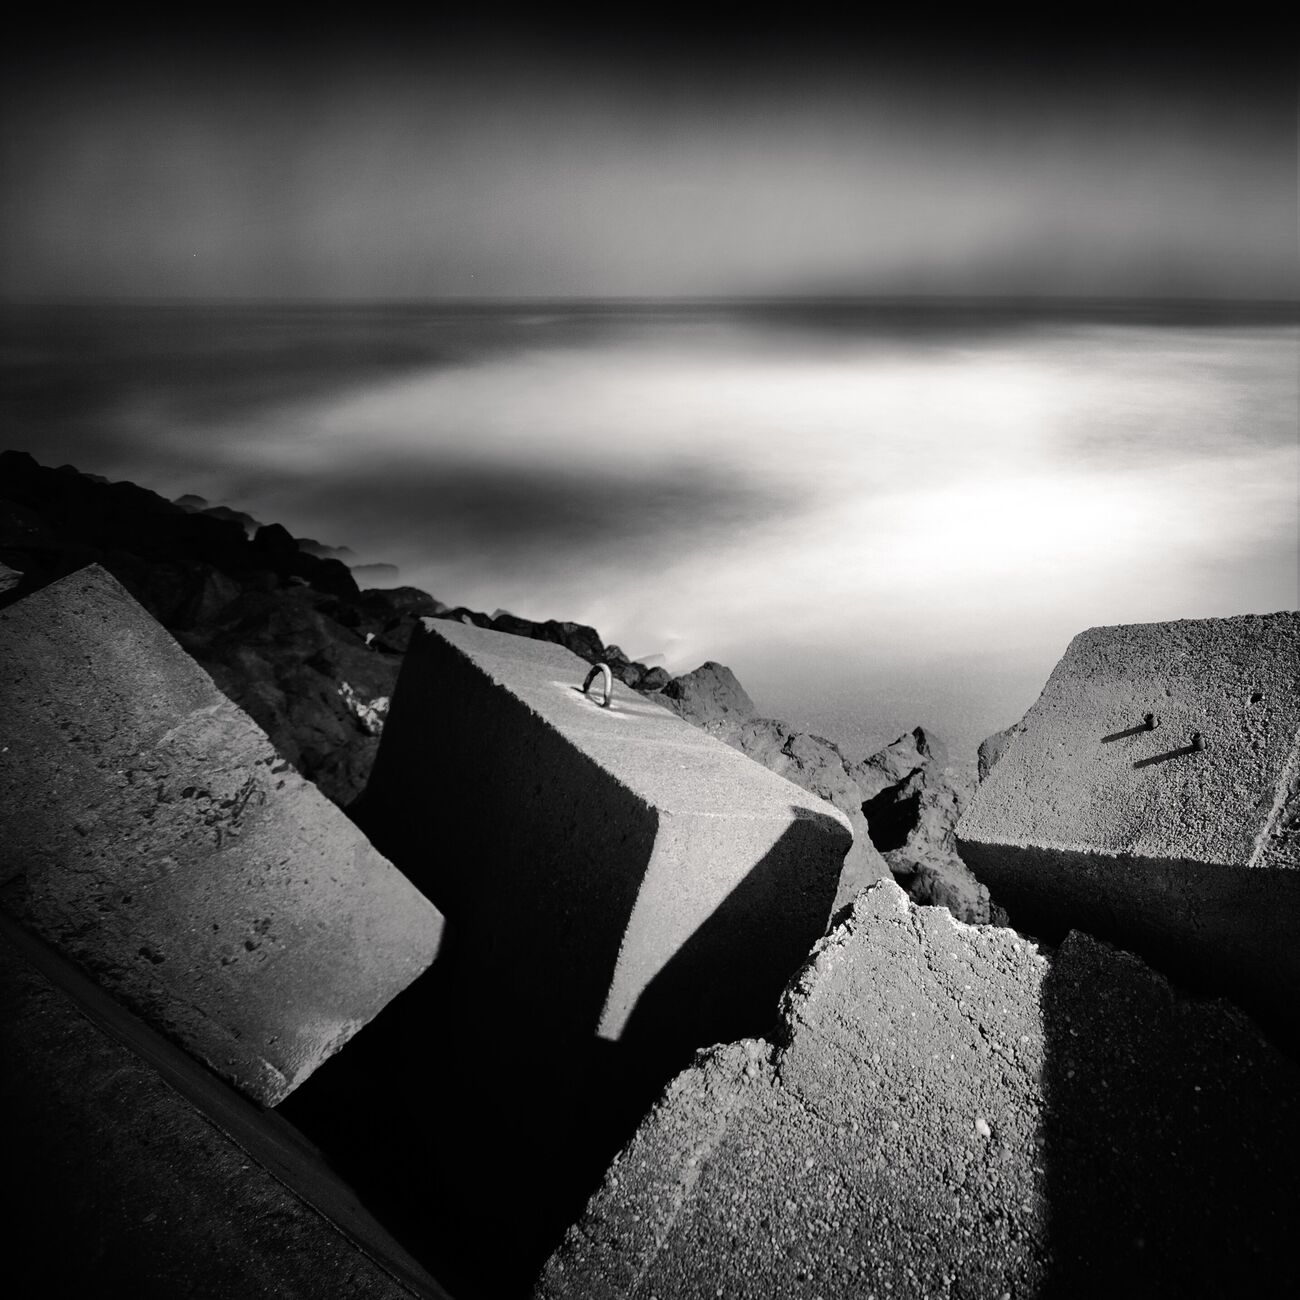 Concrete In Stormy Ocean, Bayonne, France. May 2007. Ref-1364 - Denis Olivier Photography